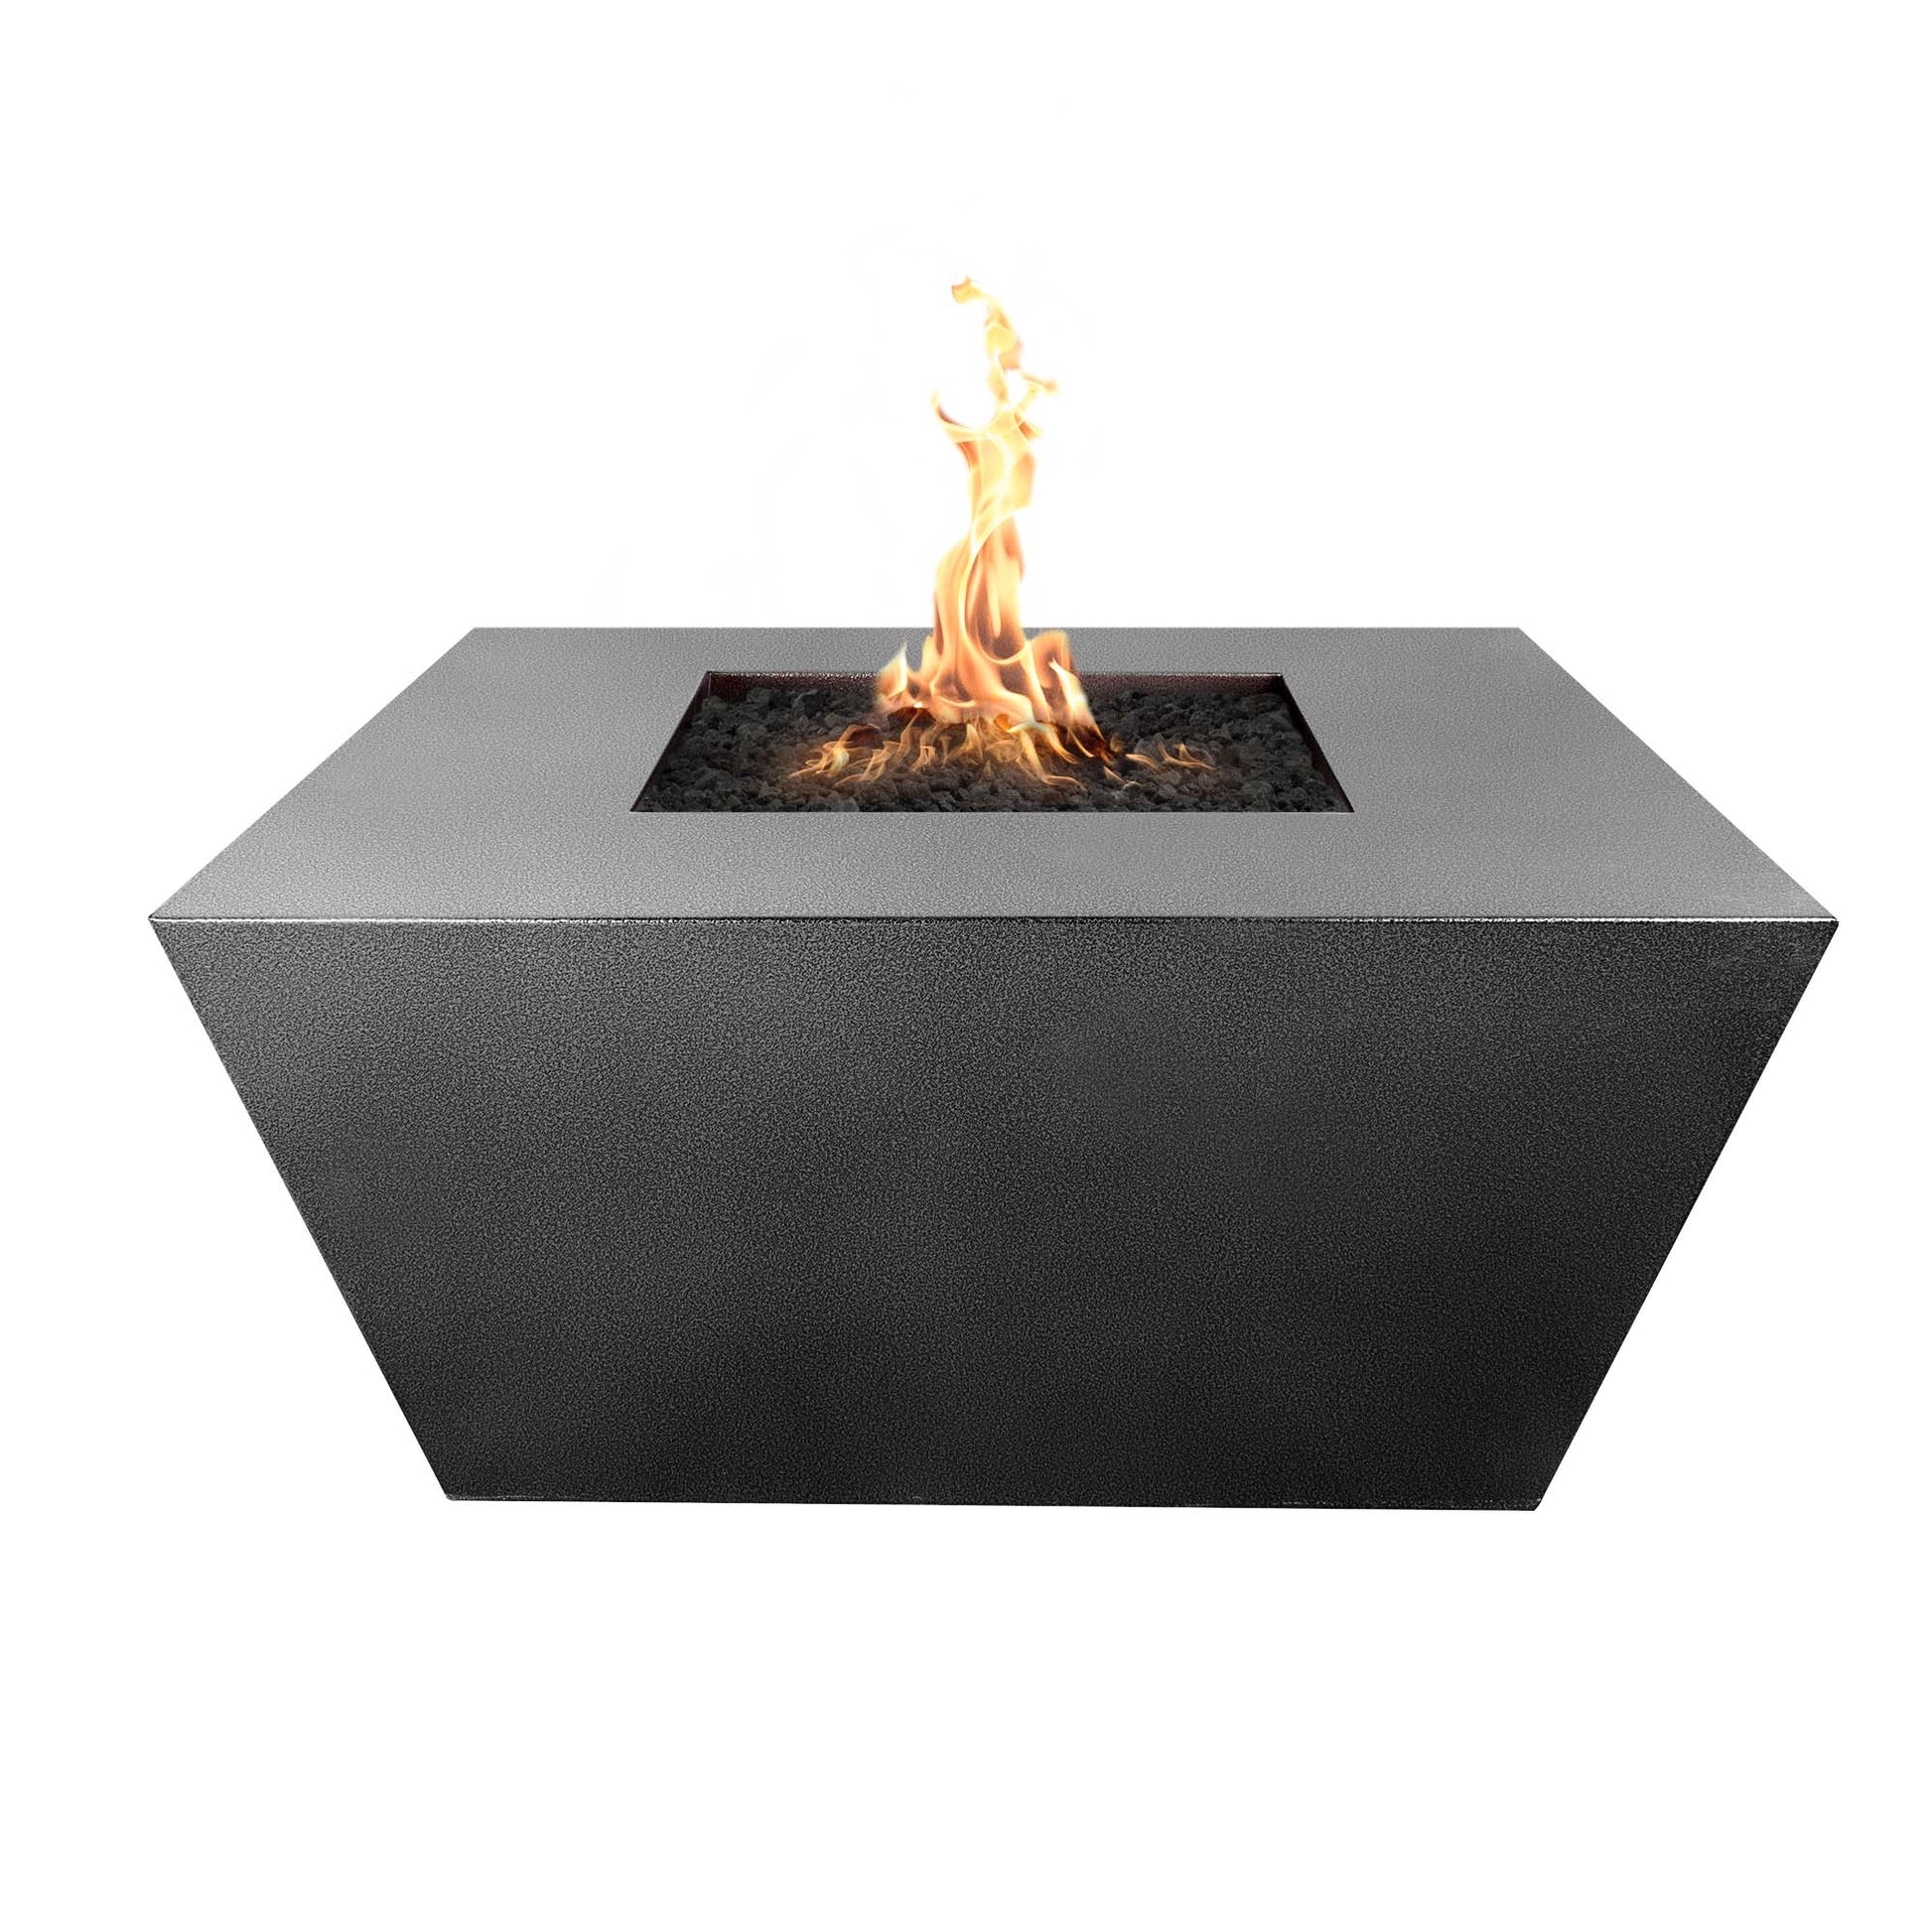 The Outdoor Plus Square Redan 36" Stainless Steel Natural Gas Fire Pit with Match Lit Ignition